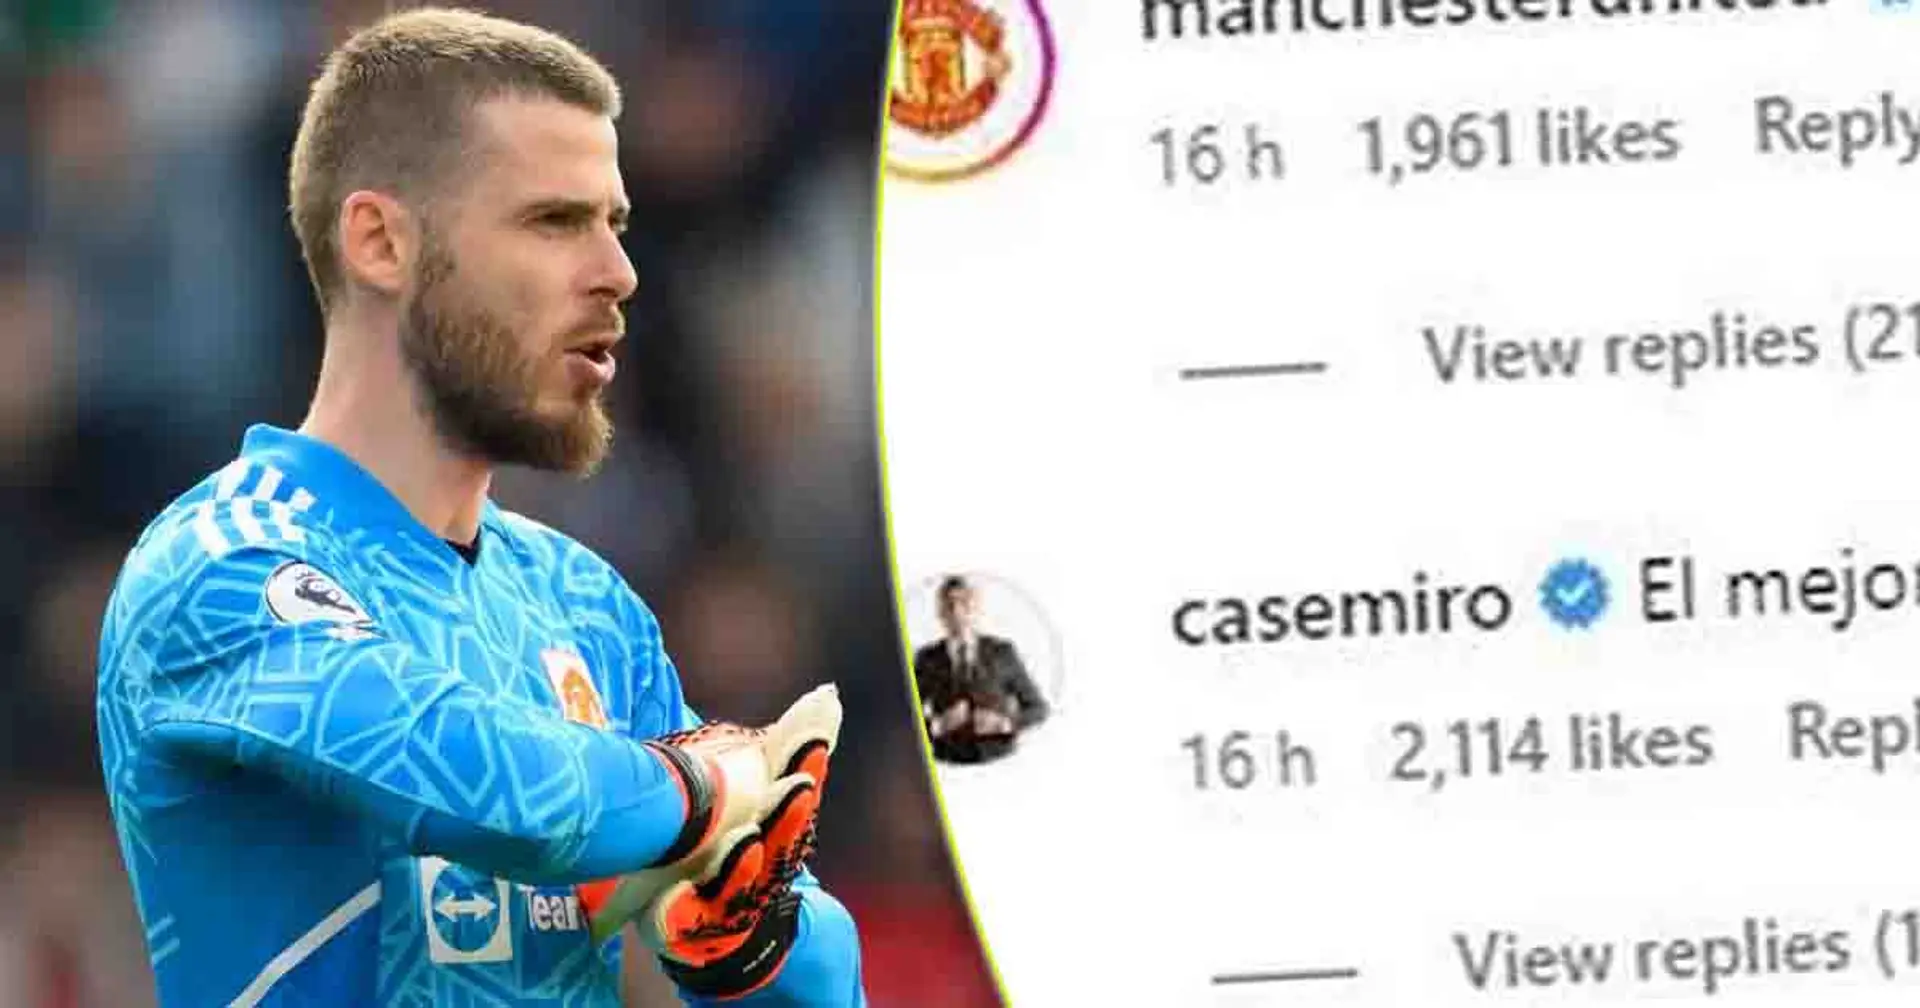 New nickname from Casemiro & more: how Man United players congratulated De Gea for Golden Glove win